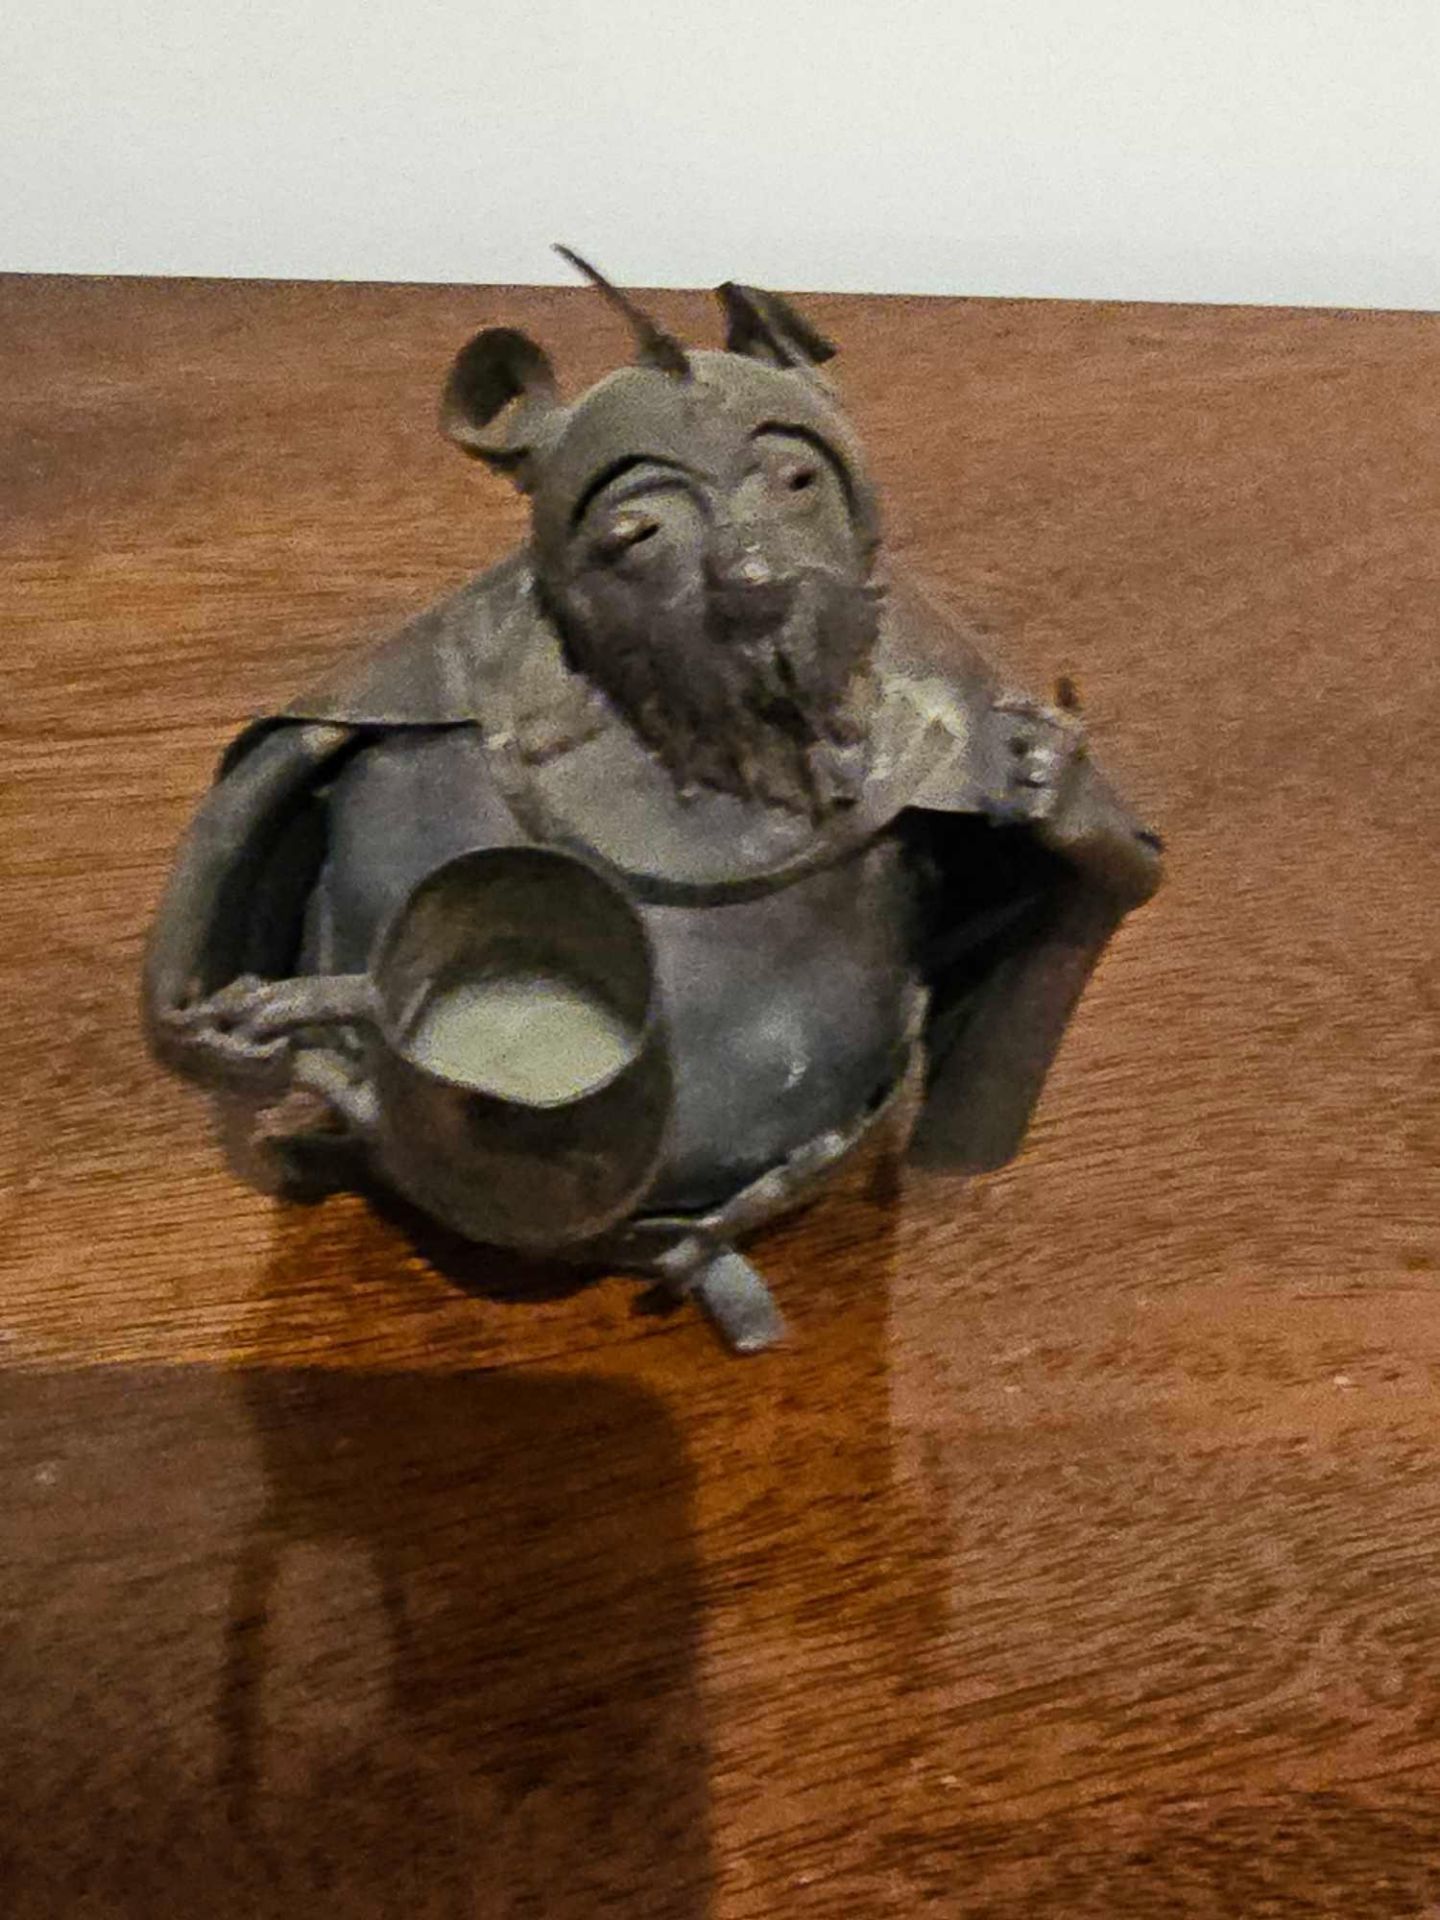 A Tin Metal Sculpture Of A Mouse Wearing A Cape And Holding A Tankard - Image 2 of 4